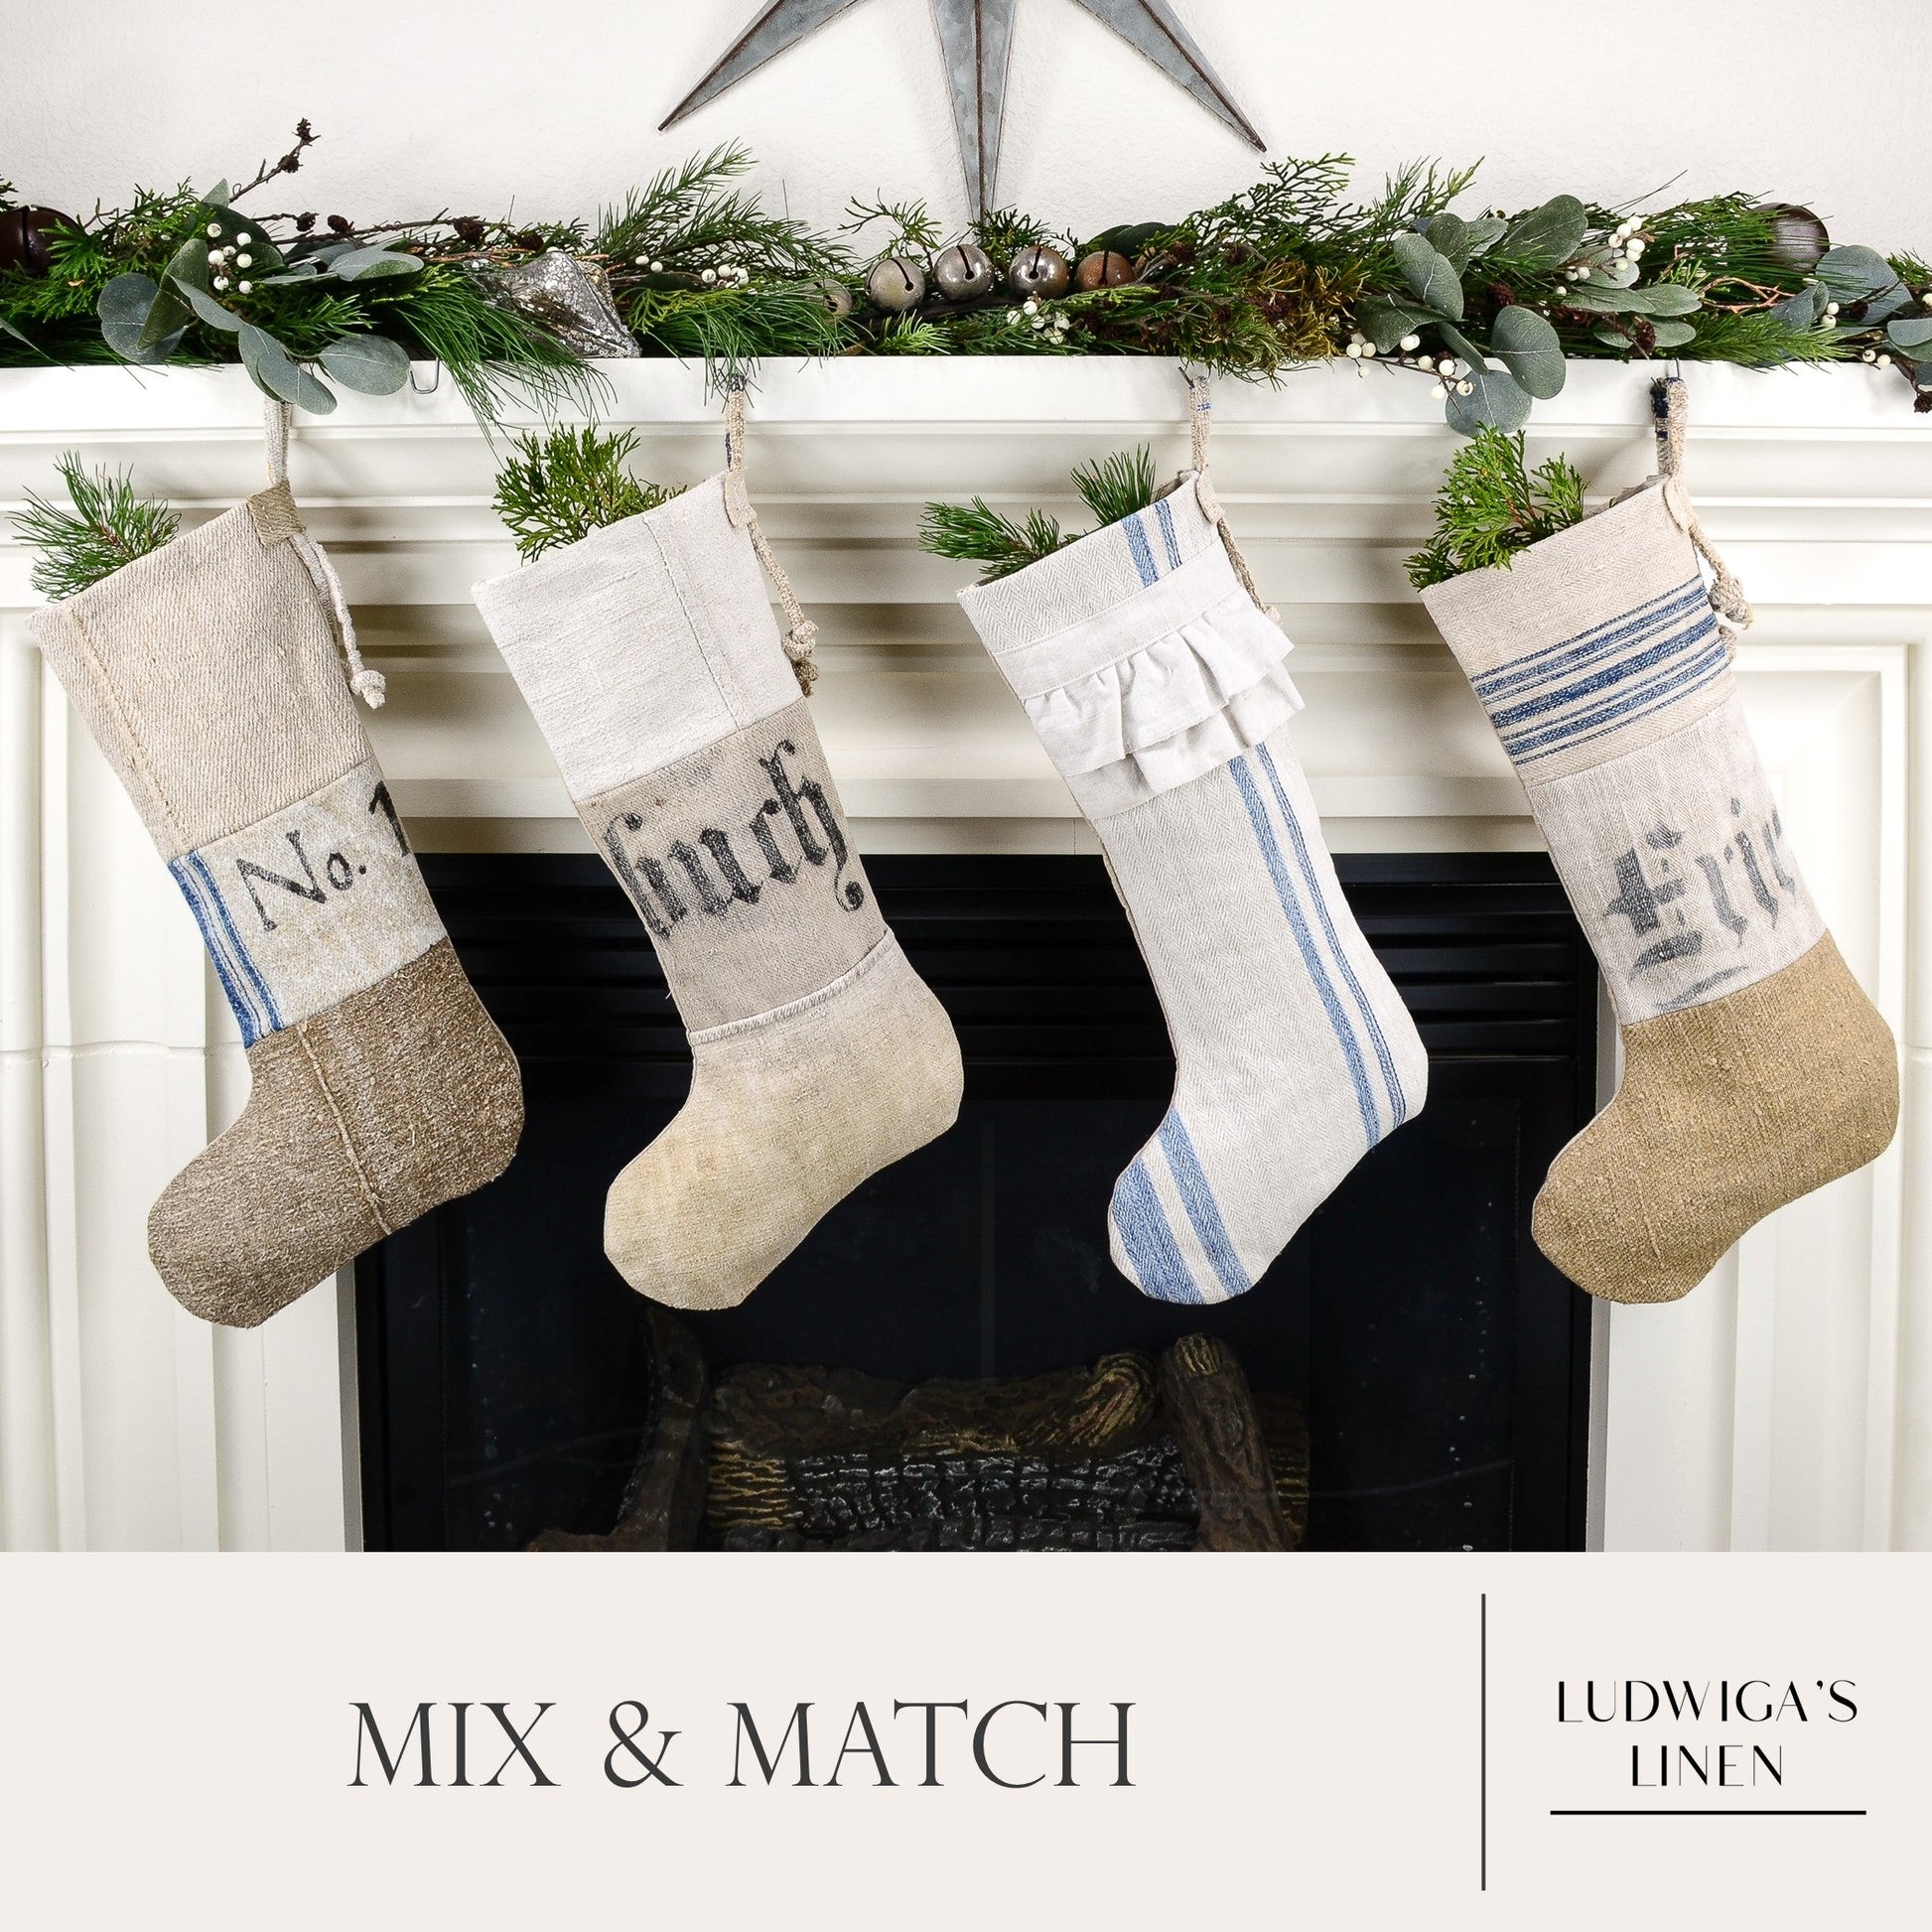 Group of four Christmas stockings hanging on fireplace